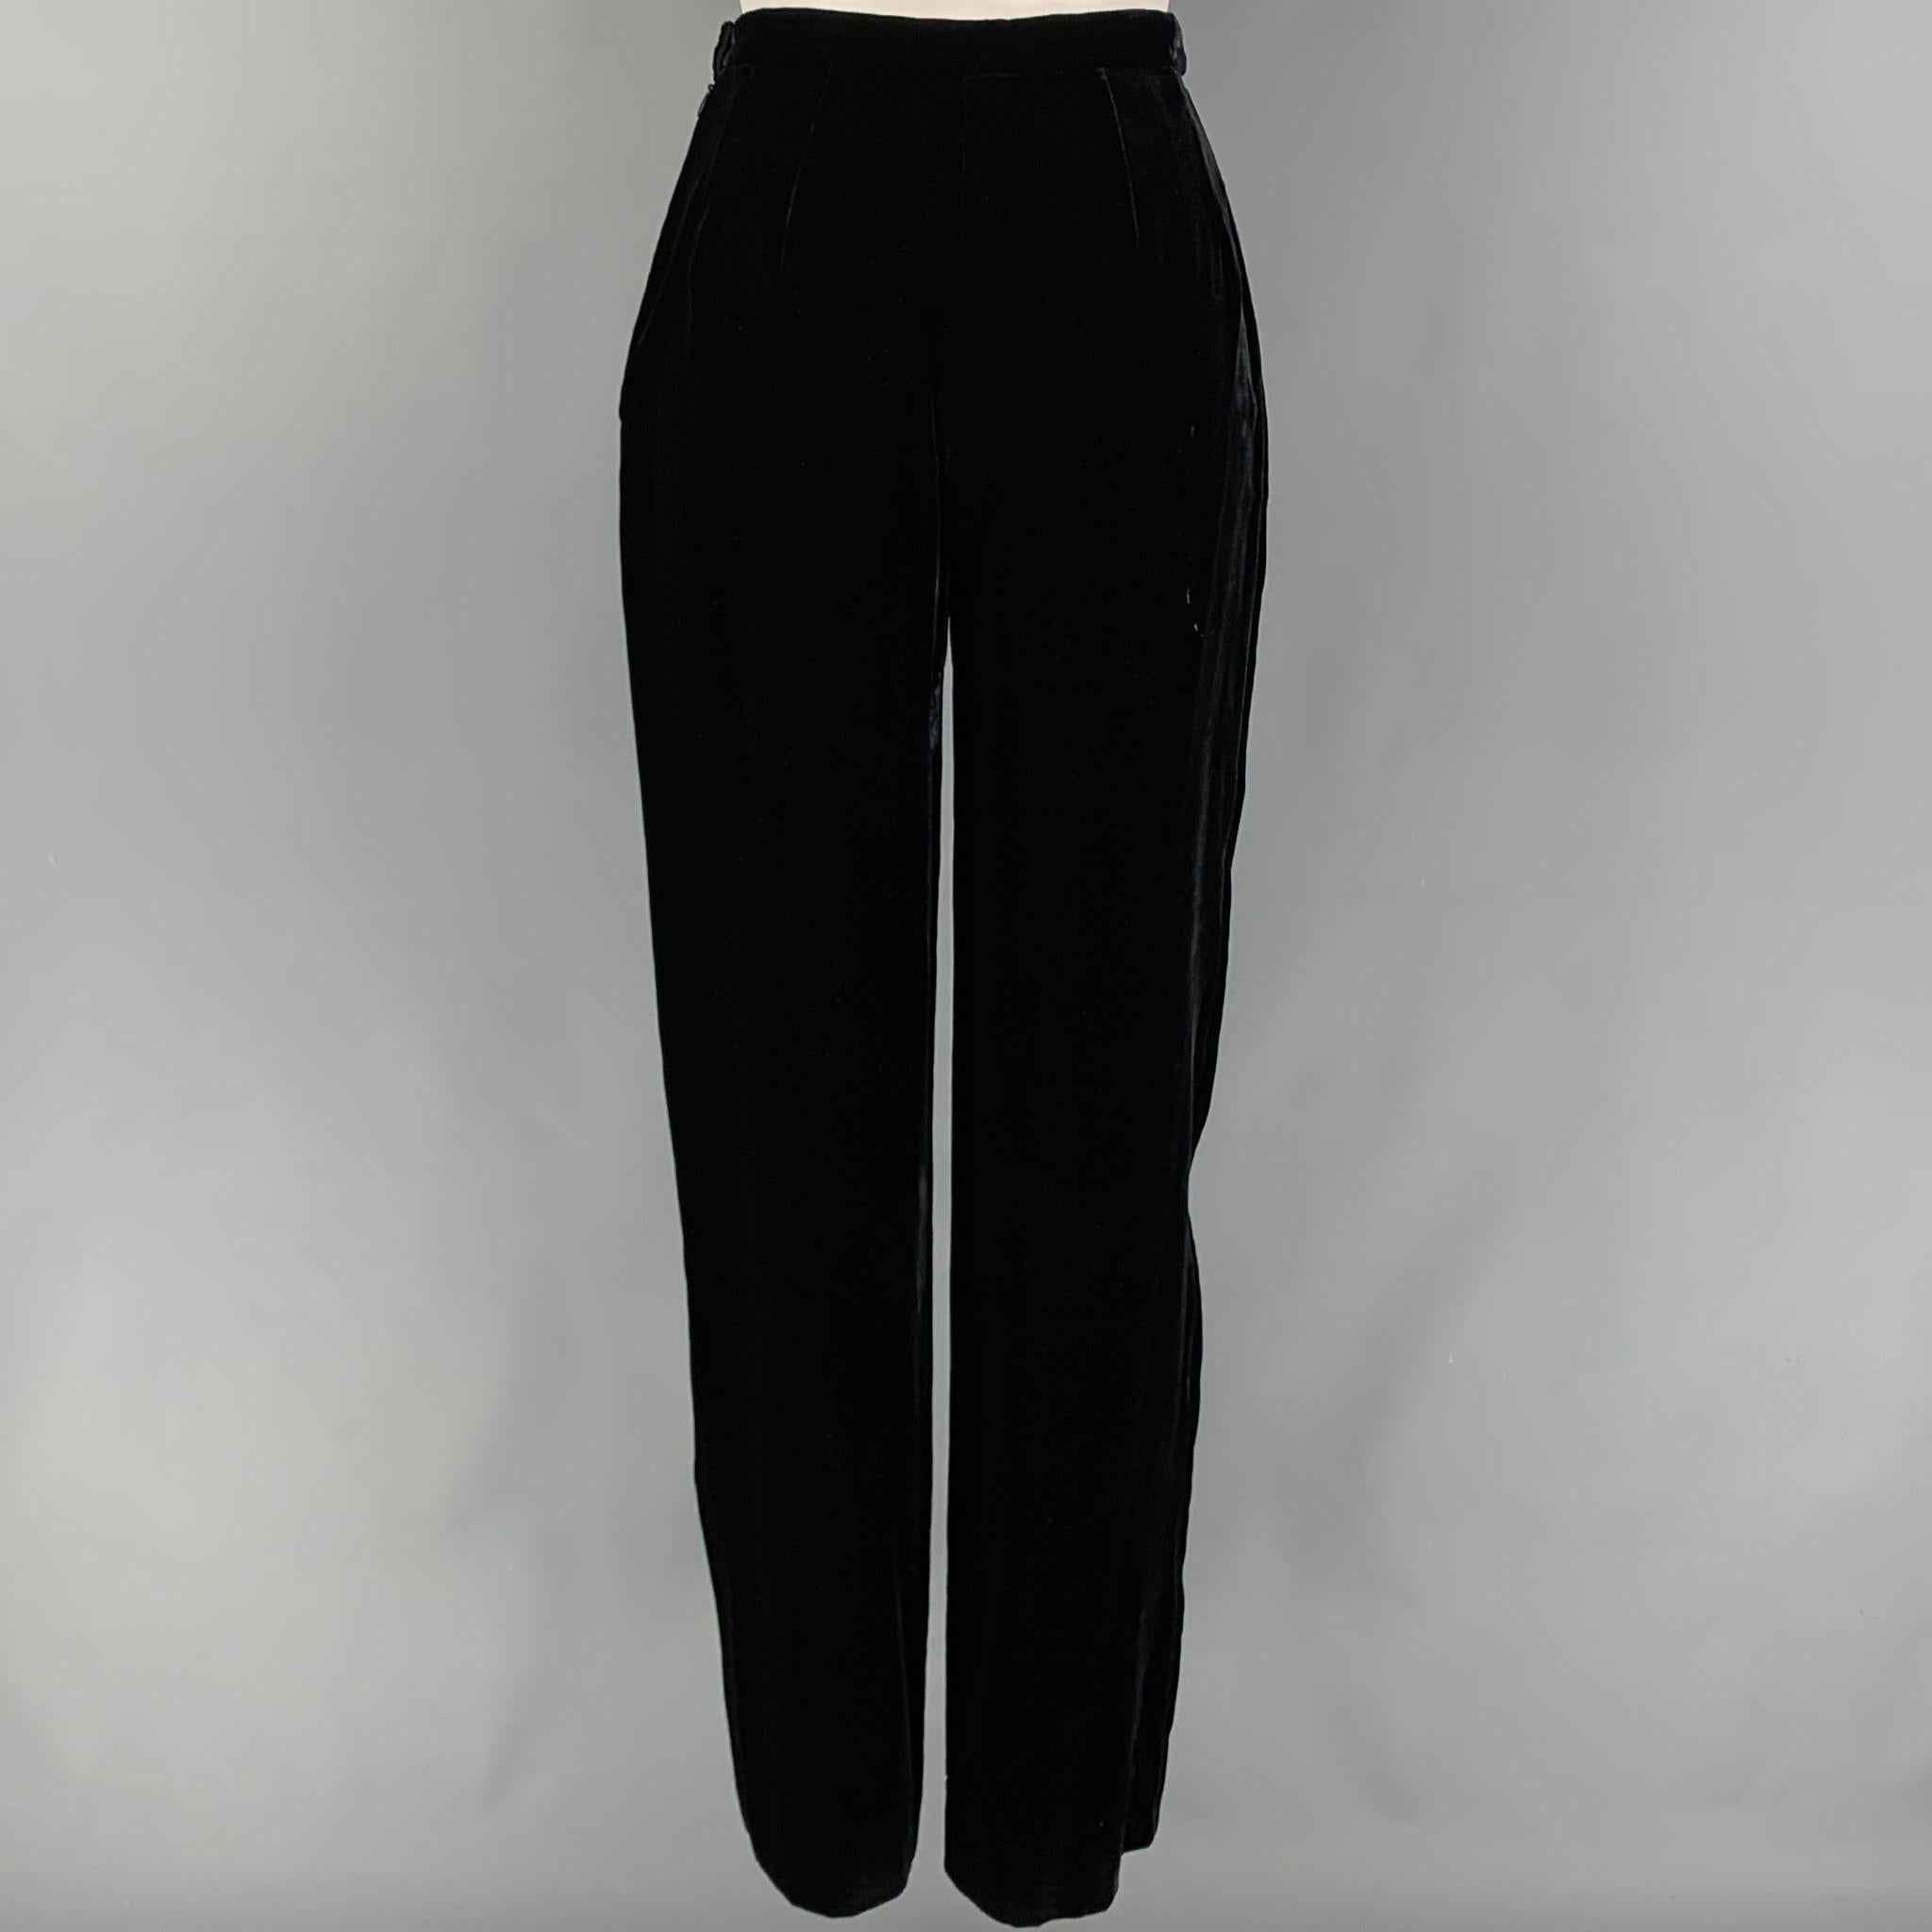 GIORGIO ARMANI pants comes in a black velvet viscose blend featuring a high waist, wide leg, and a side button & zipper closure. Made in Italy. 

Very Good Pre-Owned Condition.
Marked: 38

Measurements:

Waist: 24 in.
Rise: 11.5 in.
Inseam: 31 in. 